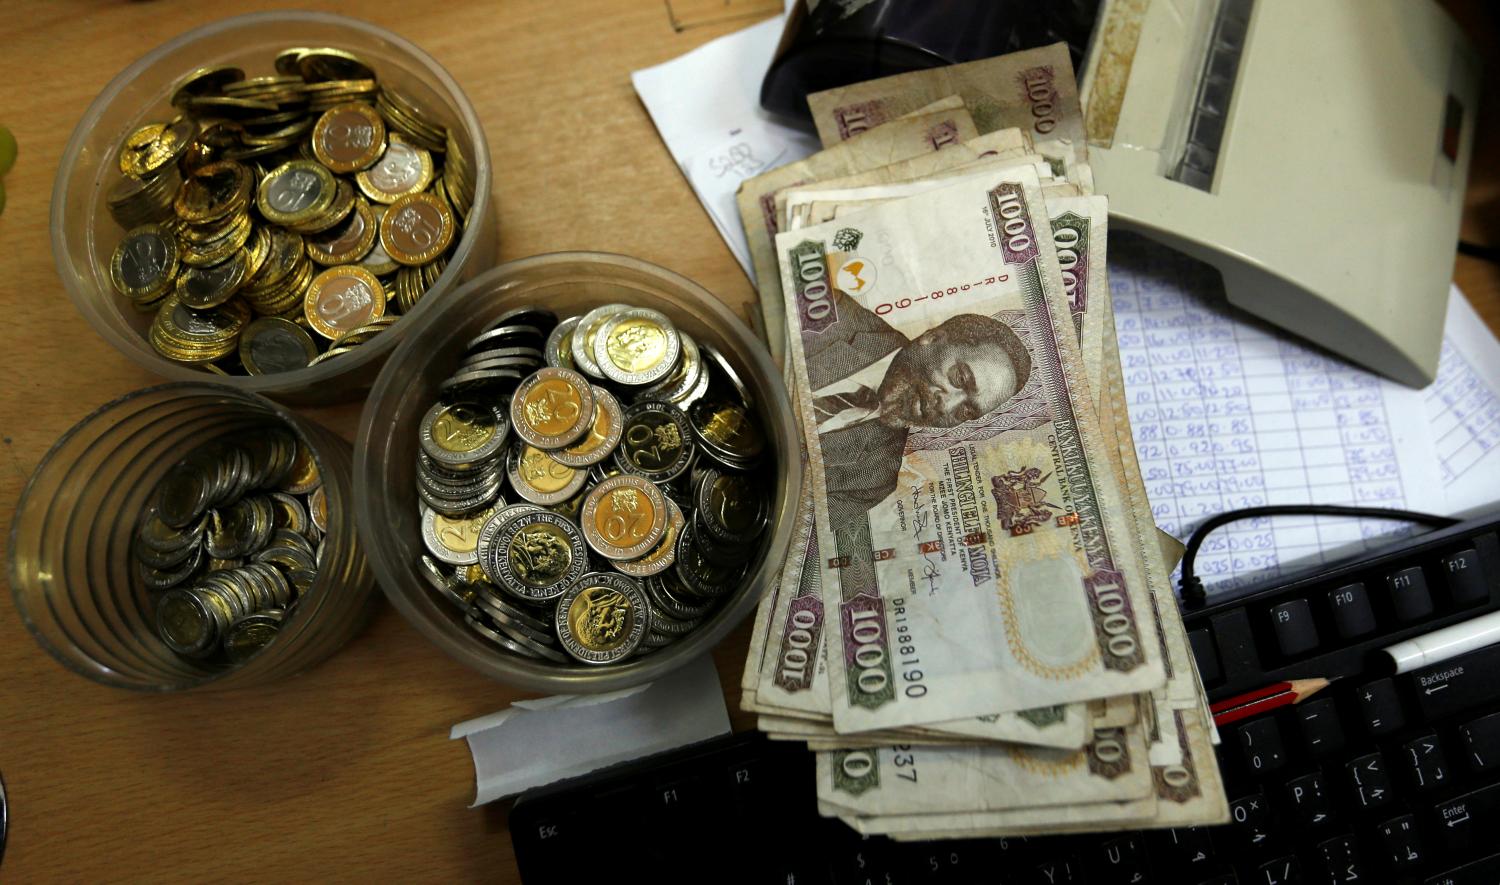 Kenya shilling coins and notes are pictured inside a cashier's booth at a forex exchange bureau in Kenya's capital Nairobi, April 20, 2016. REUTERS/Thomas Mukoya? - D1AESZMHRWAA